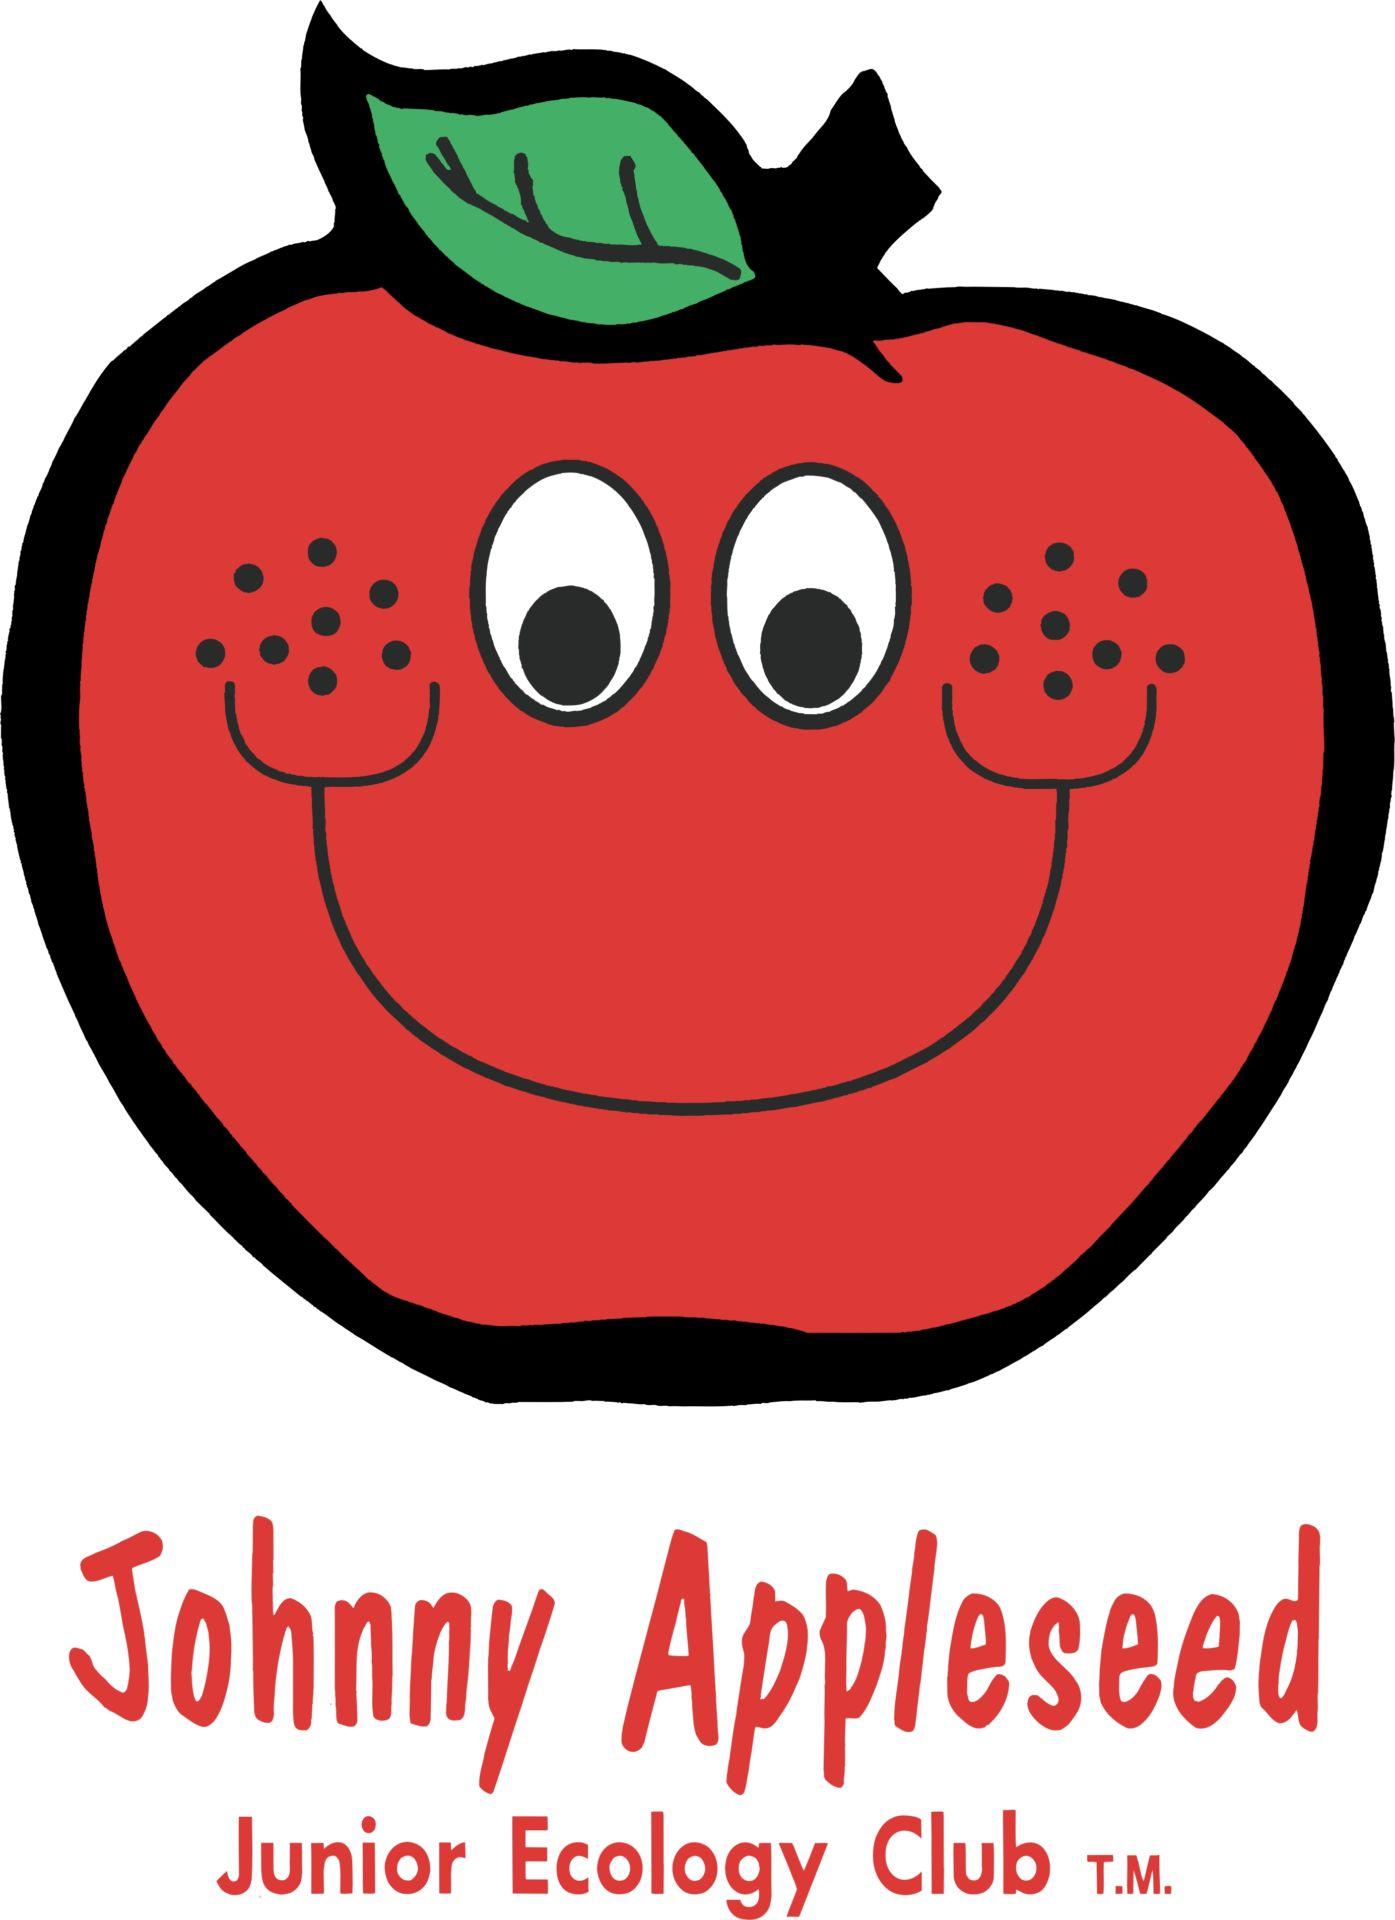 Johnny Appleseed Logo - Johnny Appleseed Jr. Ecology Club T.M. logo - MidSouth Community ...